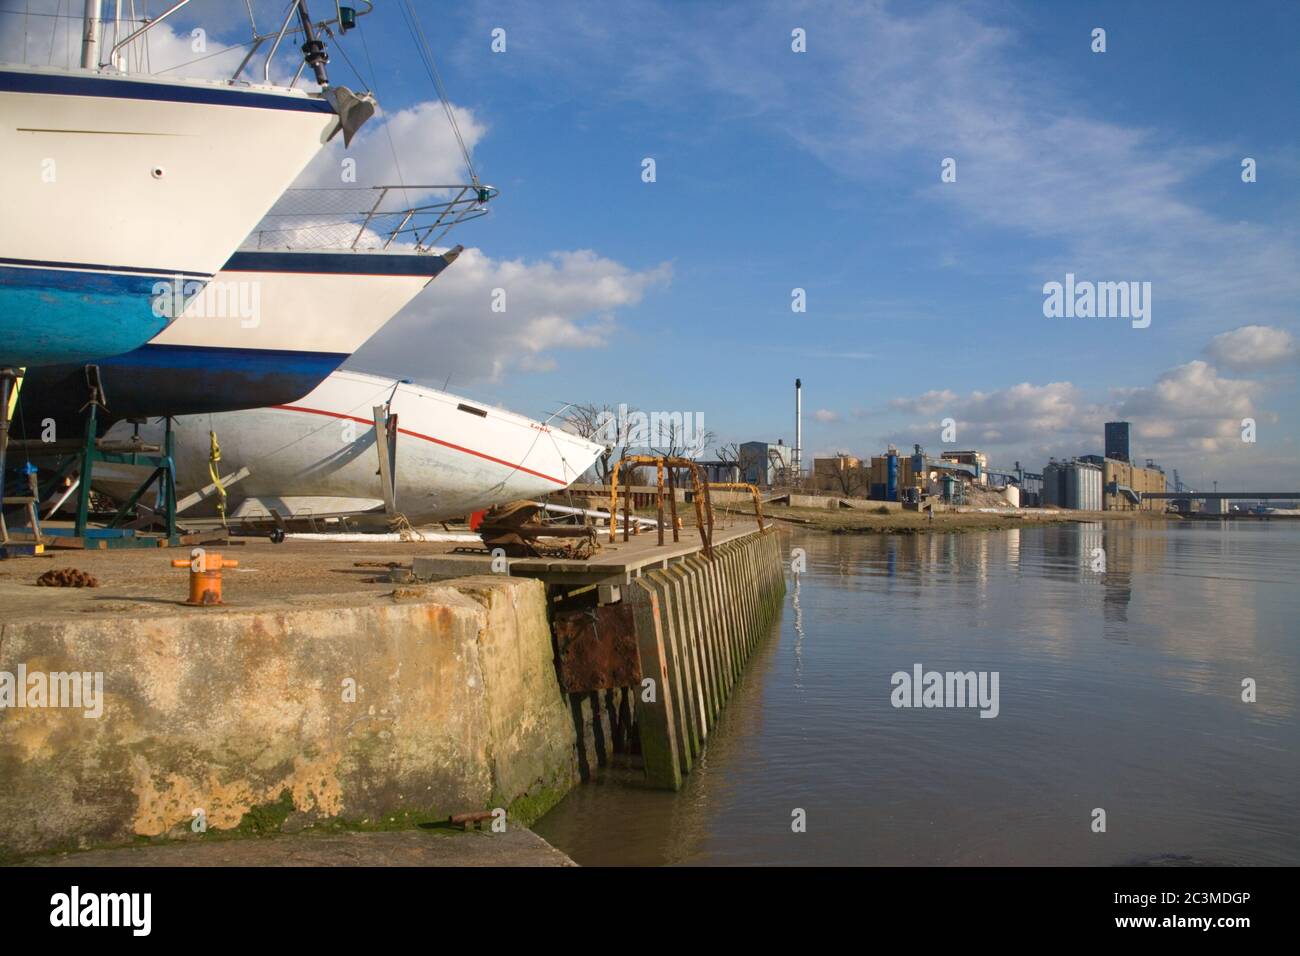 thurrock sailing club at grays on the north bank or the river thames in London Stock Photo